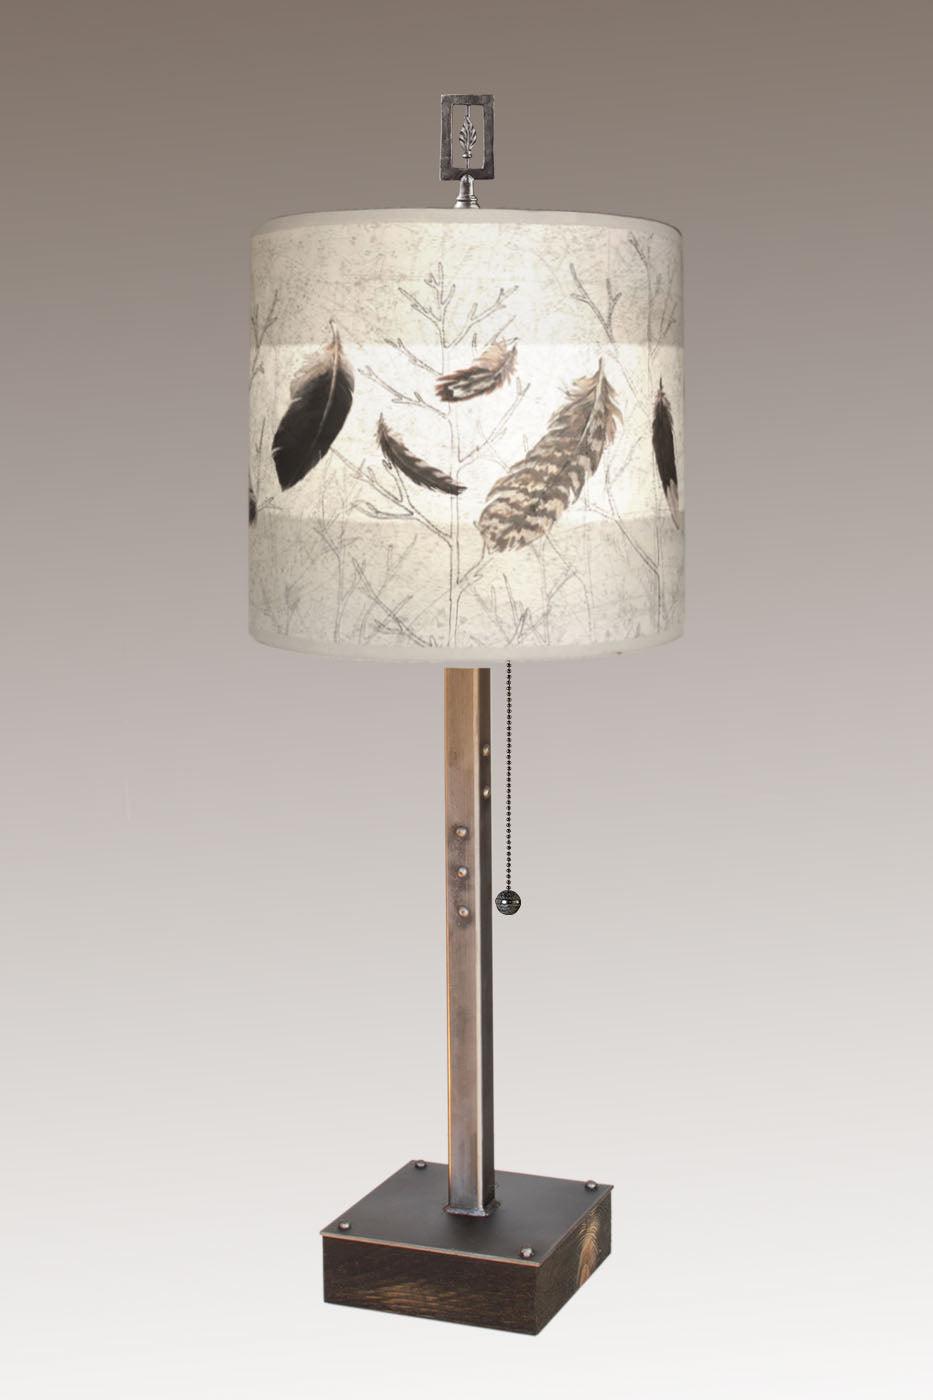 Janna Ugone & Co Table Lamps Steel Table Lamp on Wood with Medium Drum Shade in Feathers in Pebble